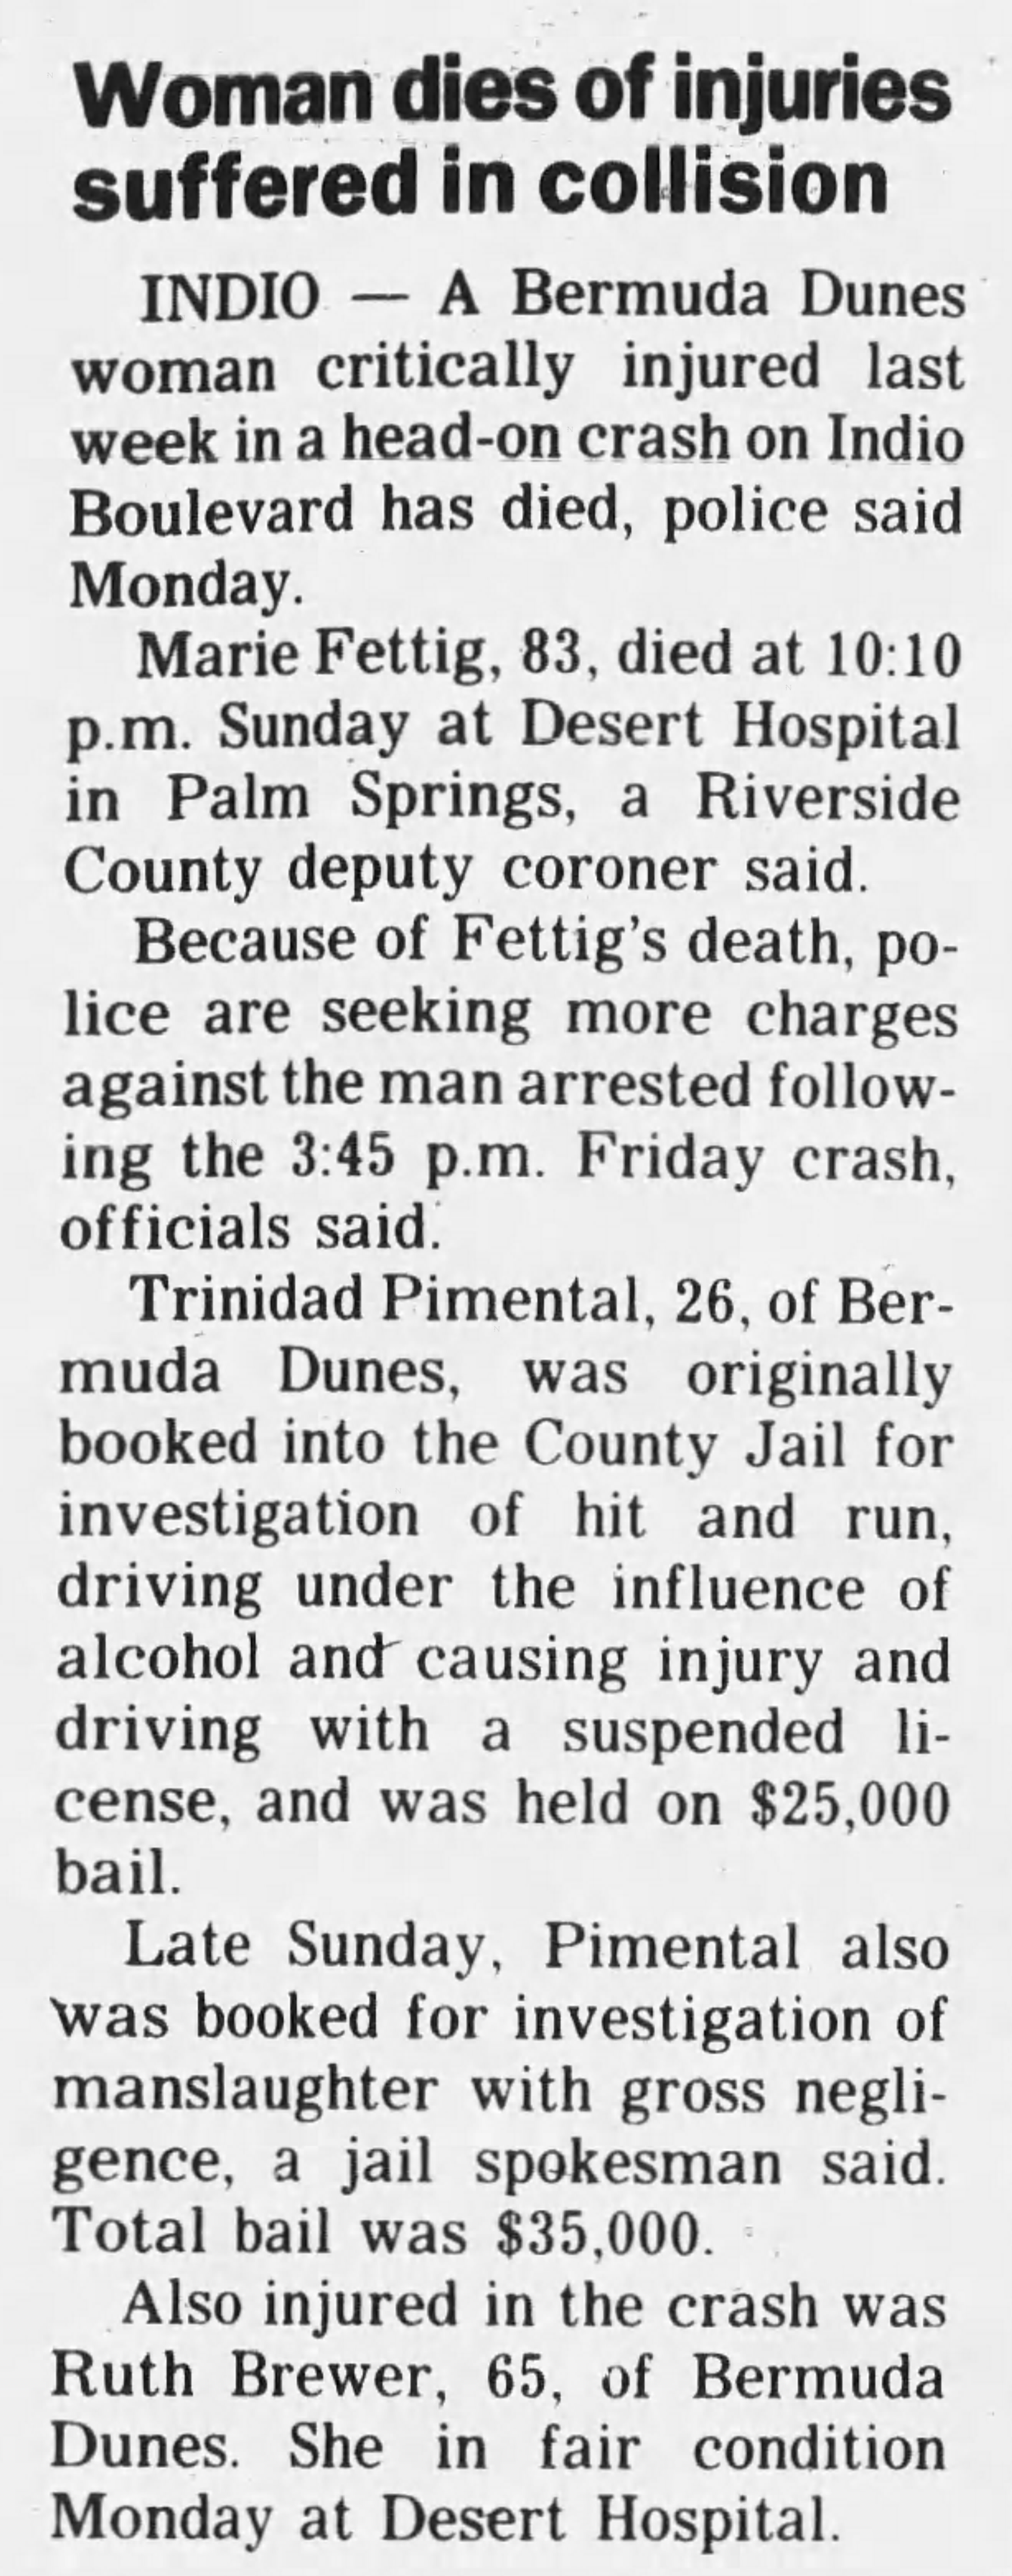 Article about the death of Marie Fettig after a driver under the influence struck her car